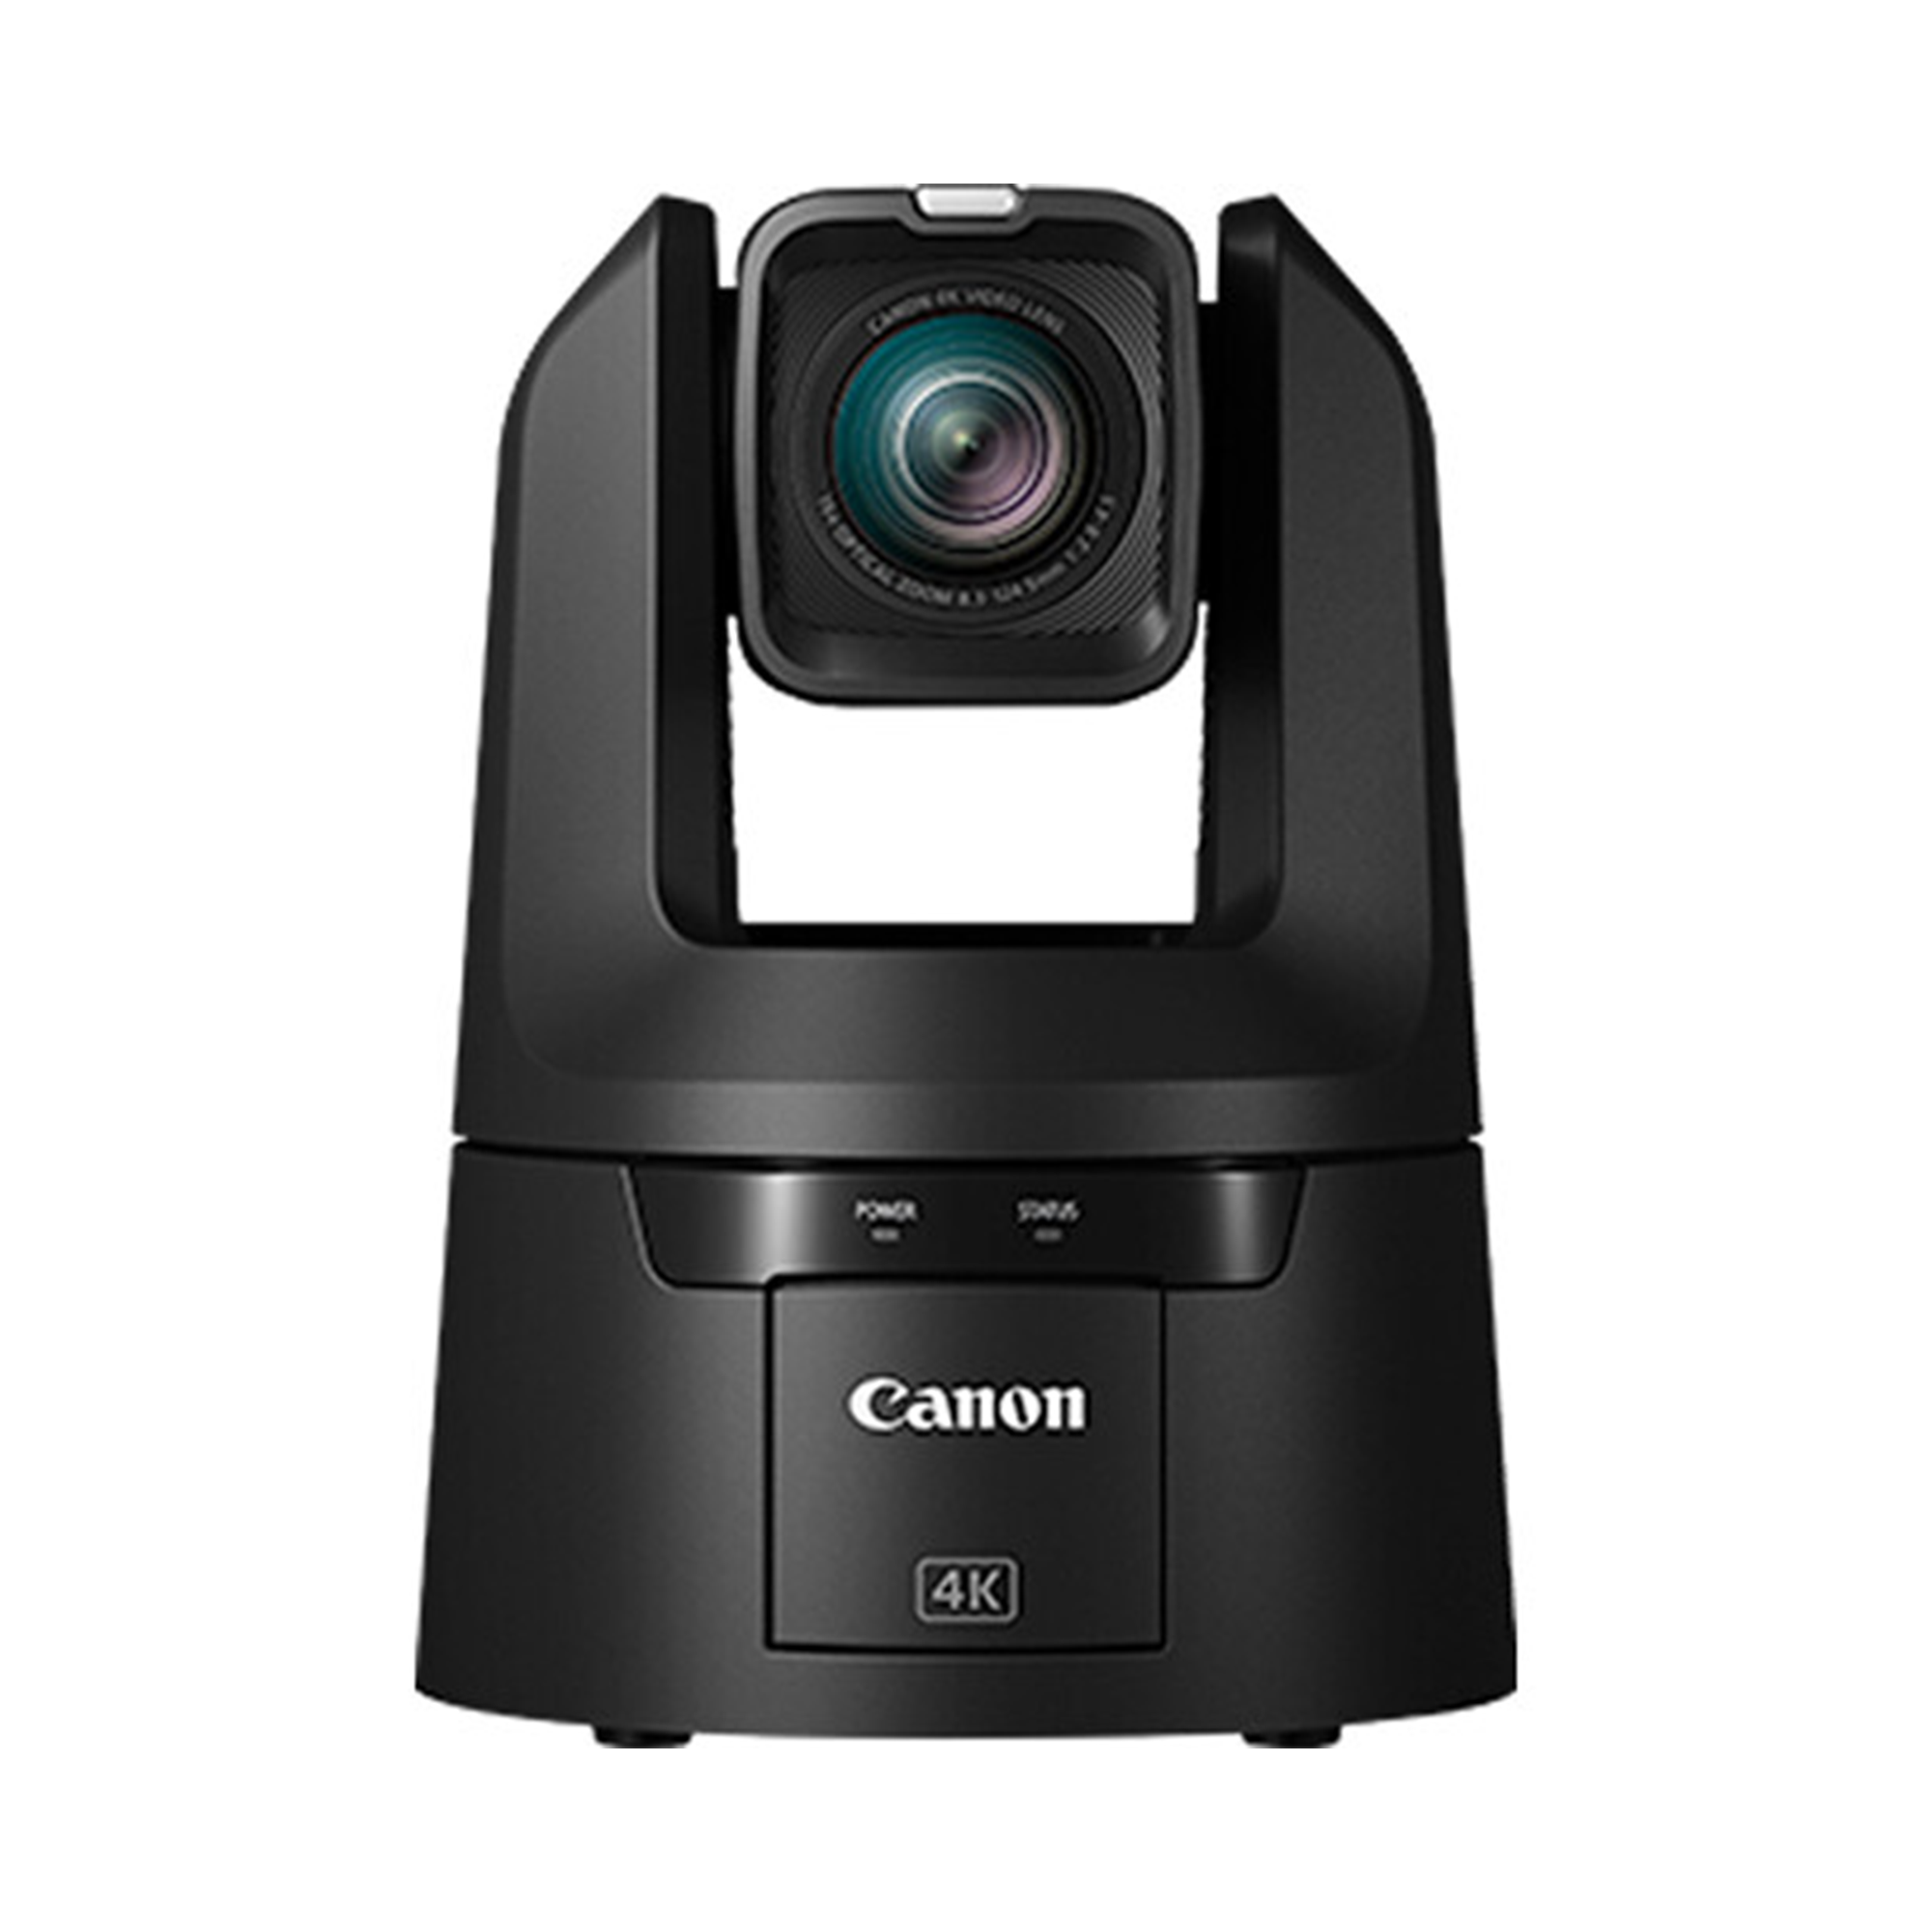 Canon CR-N500 Professional 4K NDI PTZ Camera with 15x Zoom and Auto-Tracking (Satin Black)